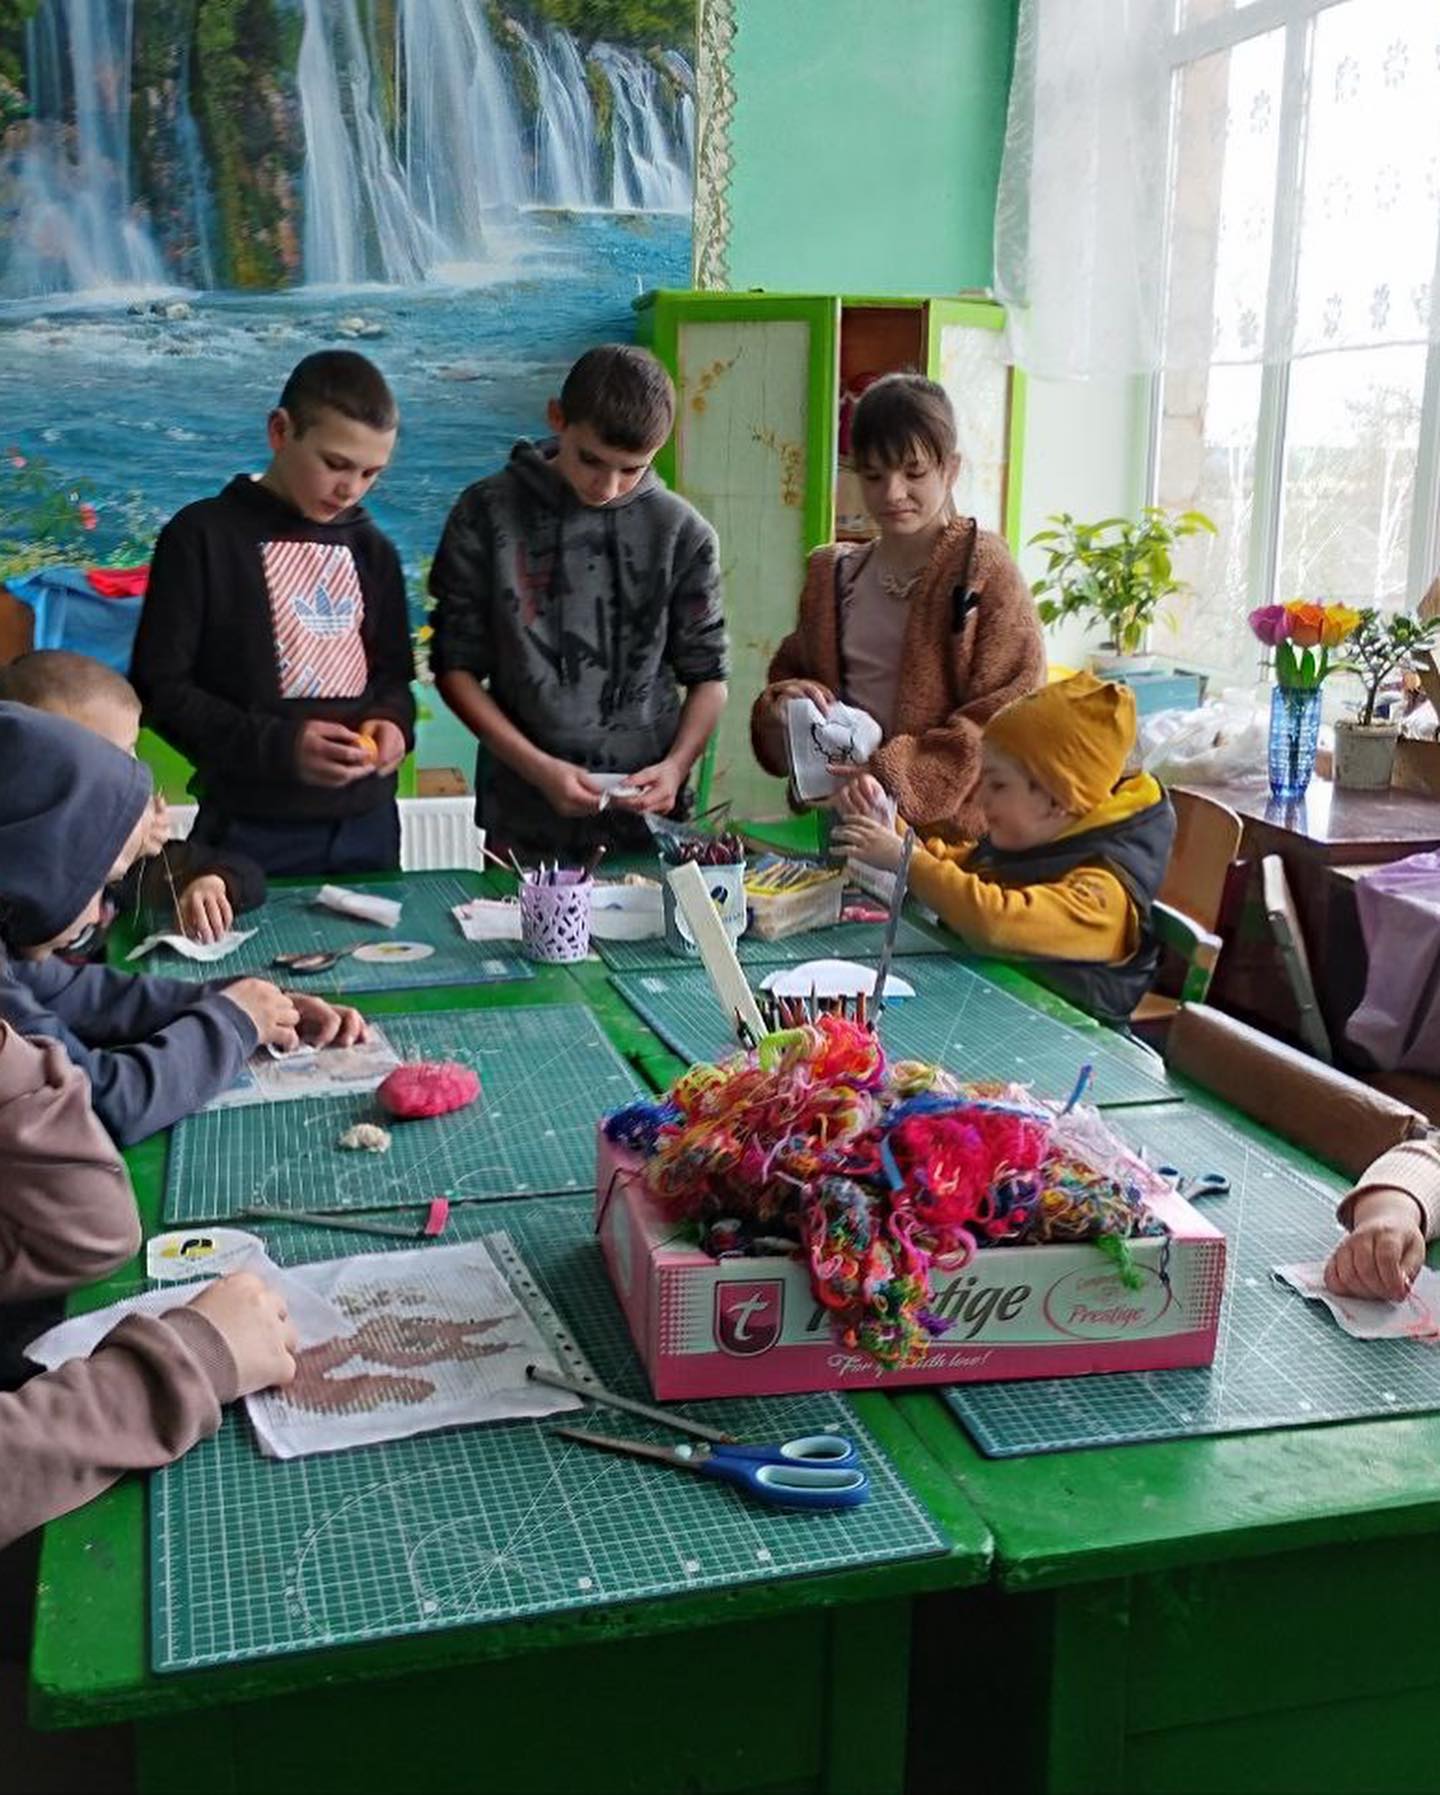 Children engaged in a craft activity around a table in a classroom with a "Hope for Ukraine" poster in the background.